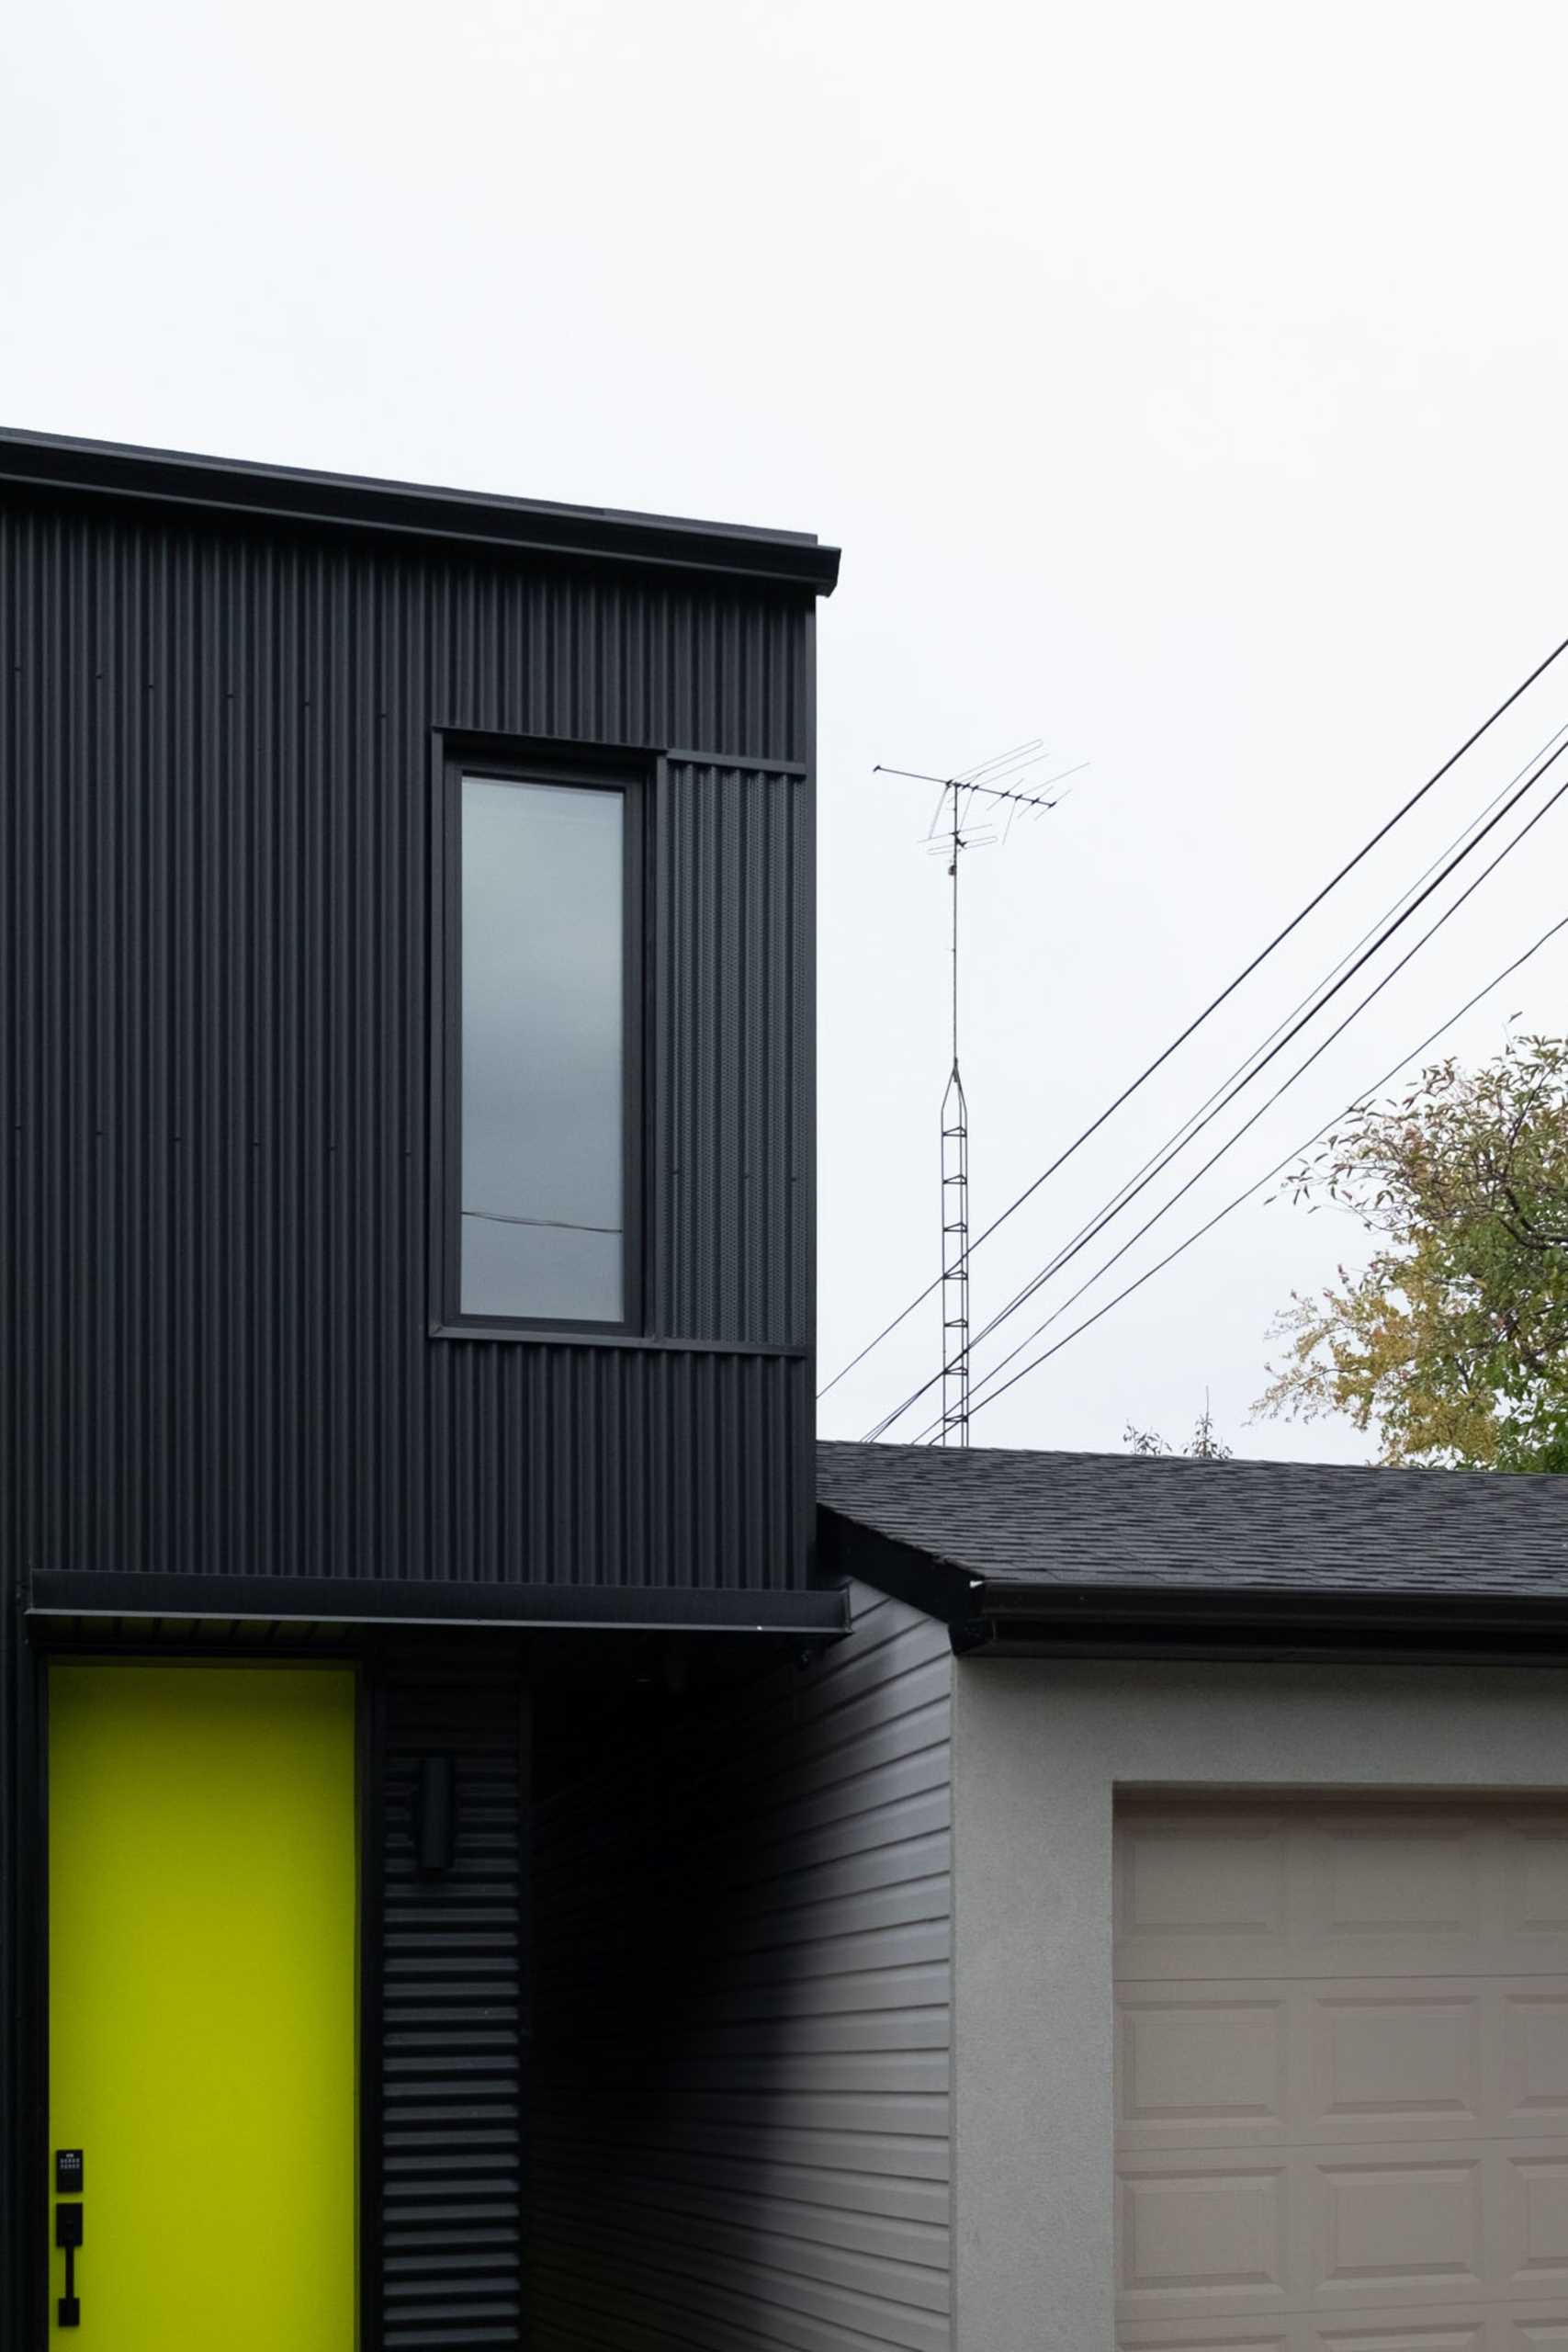 A modern laneway house with a black exterior and bright yellow door.